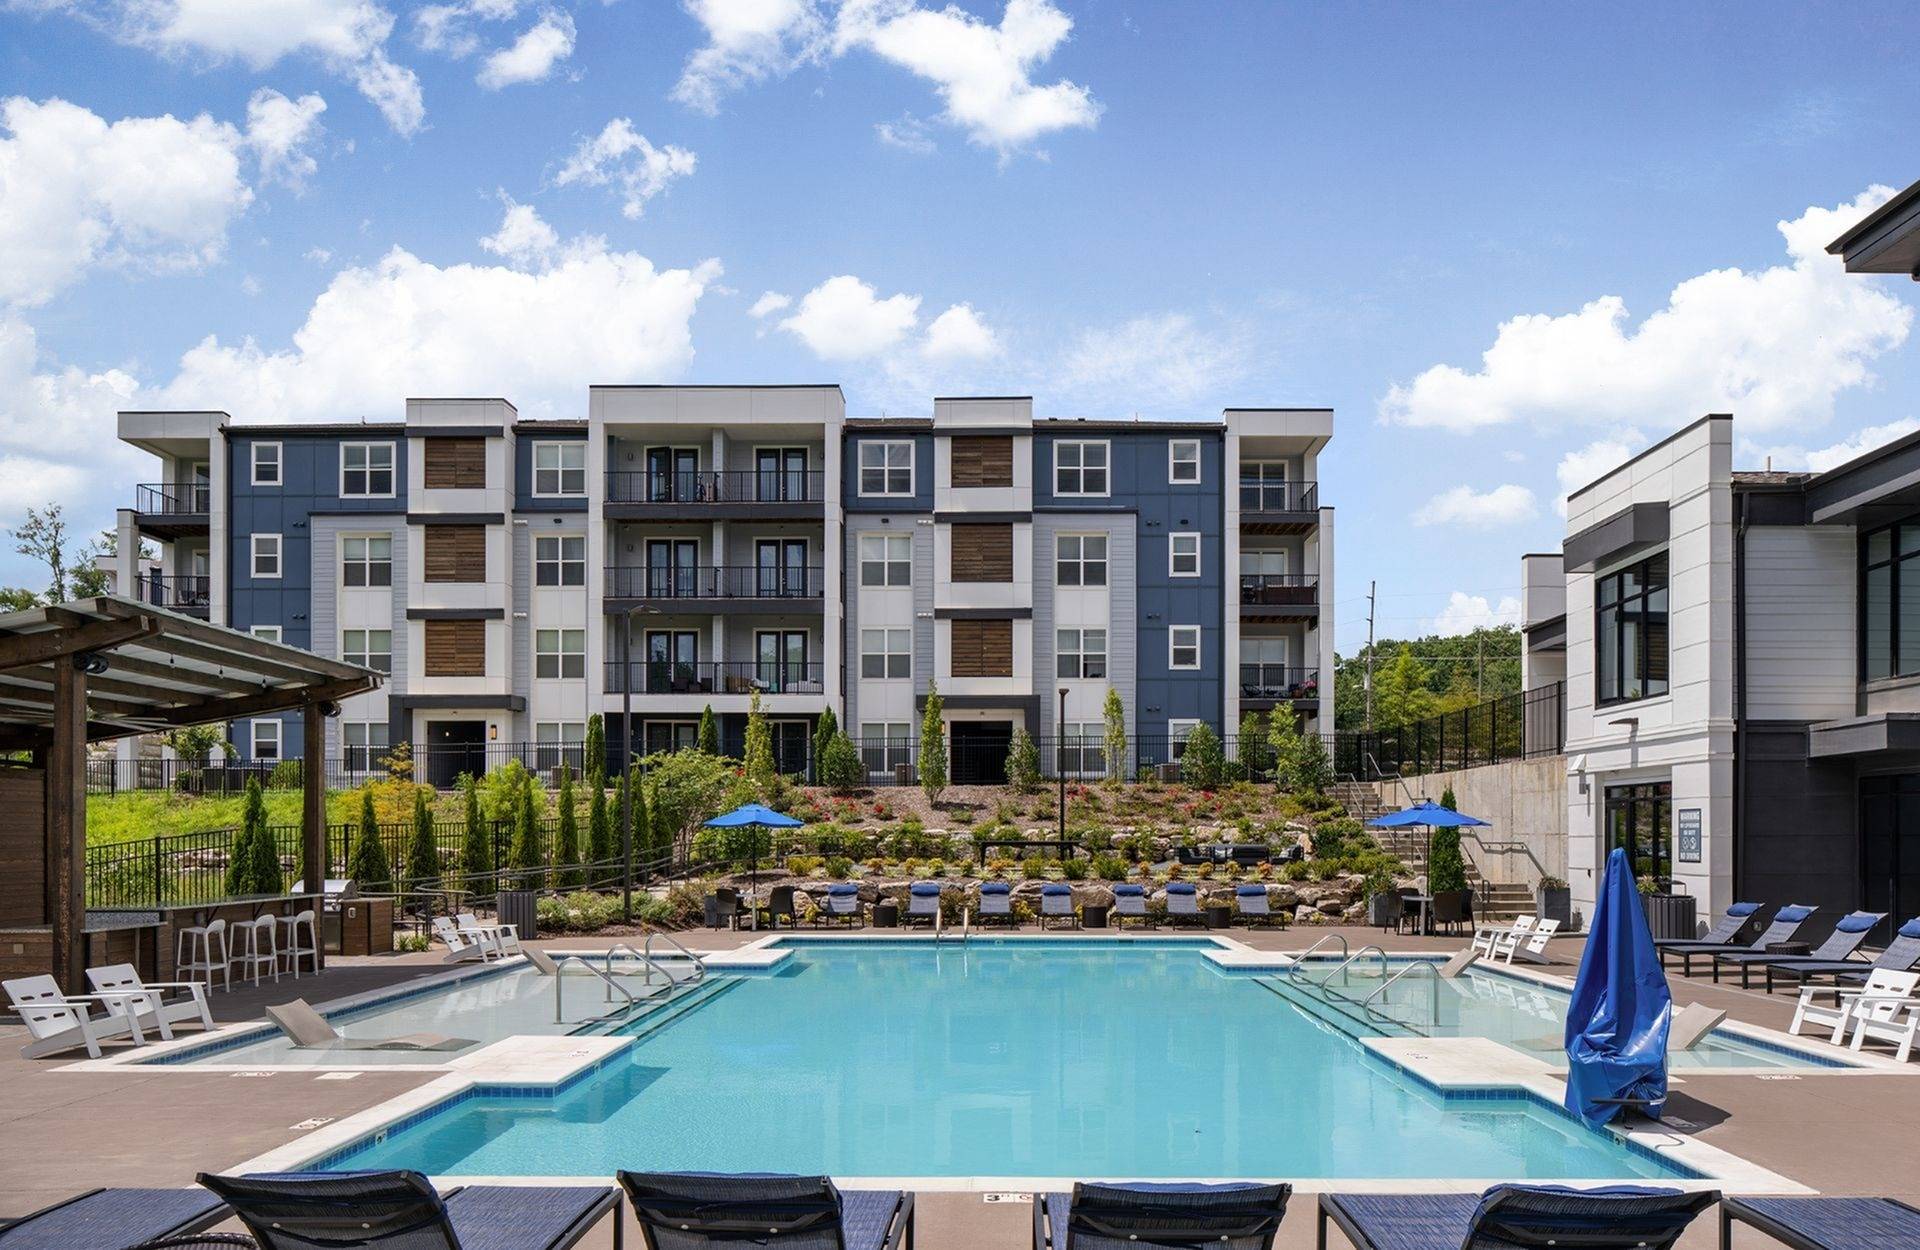 Pool Day | Apartments in Nashville, TN | The Anson